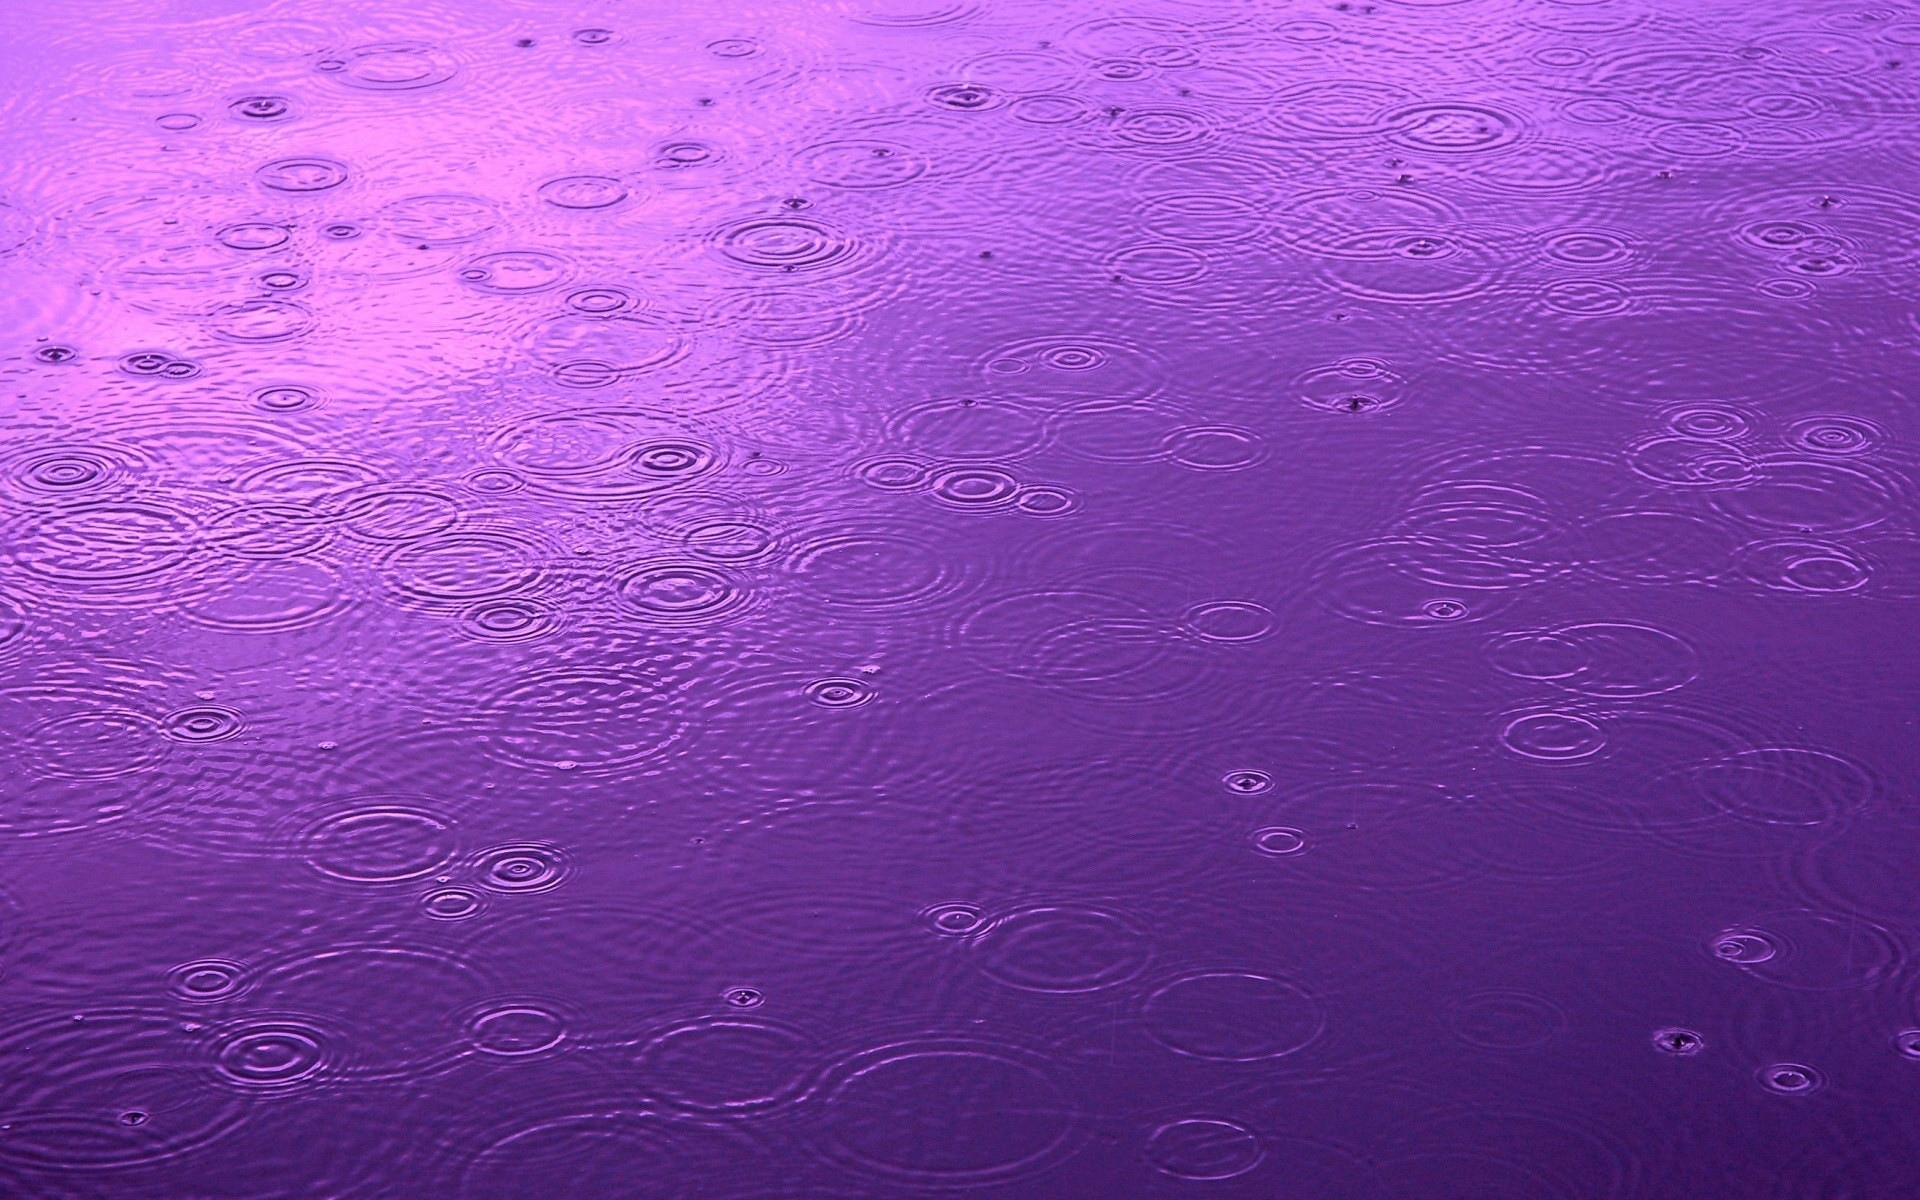 66 Raindrop HD Wallpapers Backgrounds - Wallpaper Abyss